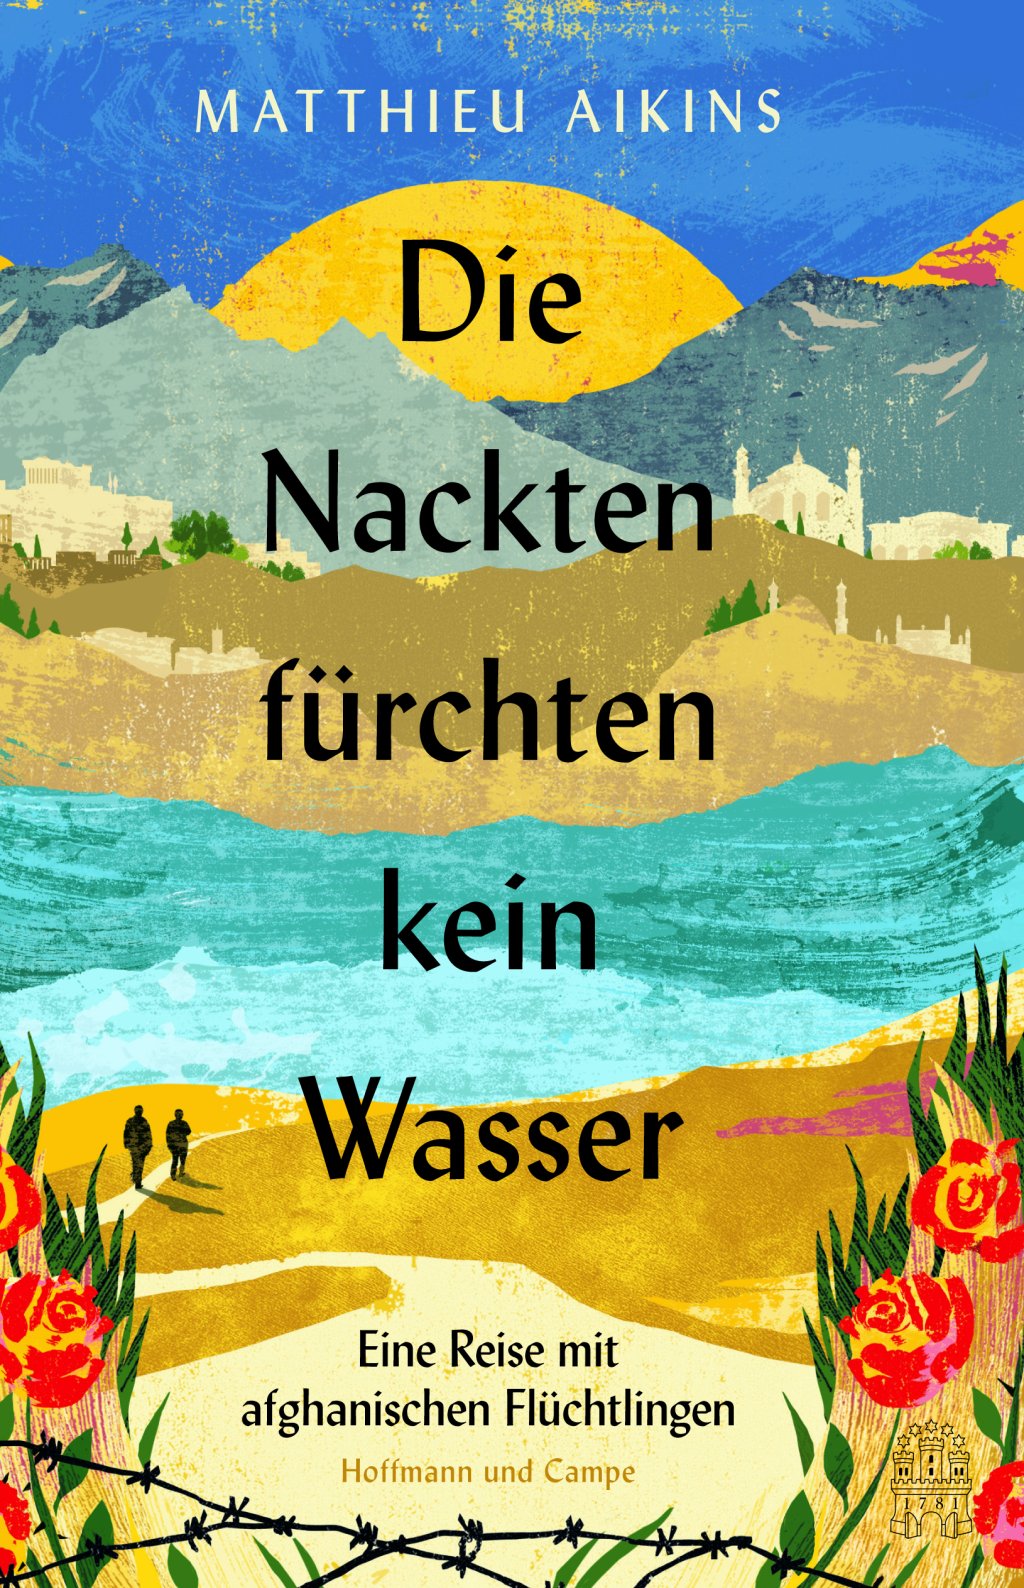 The Naked Don't Fear The Water is published in Germany in August 2022 | Photo: Hoffmann und Campe / Kiana Hayeri